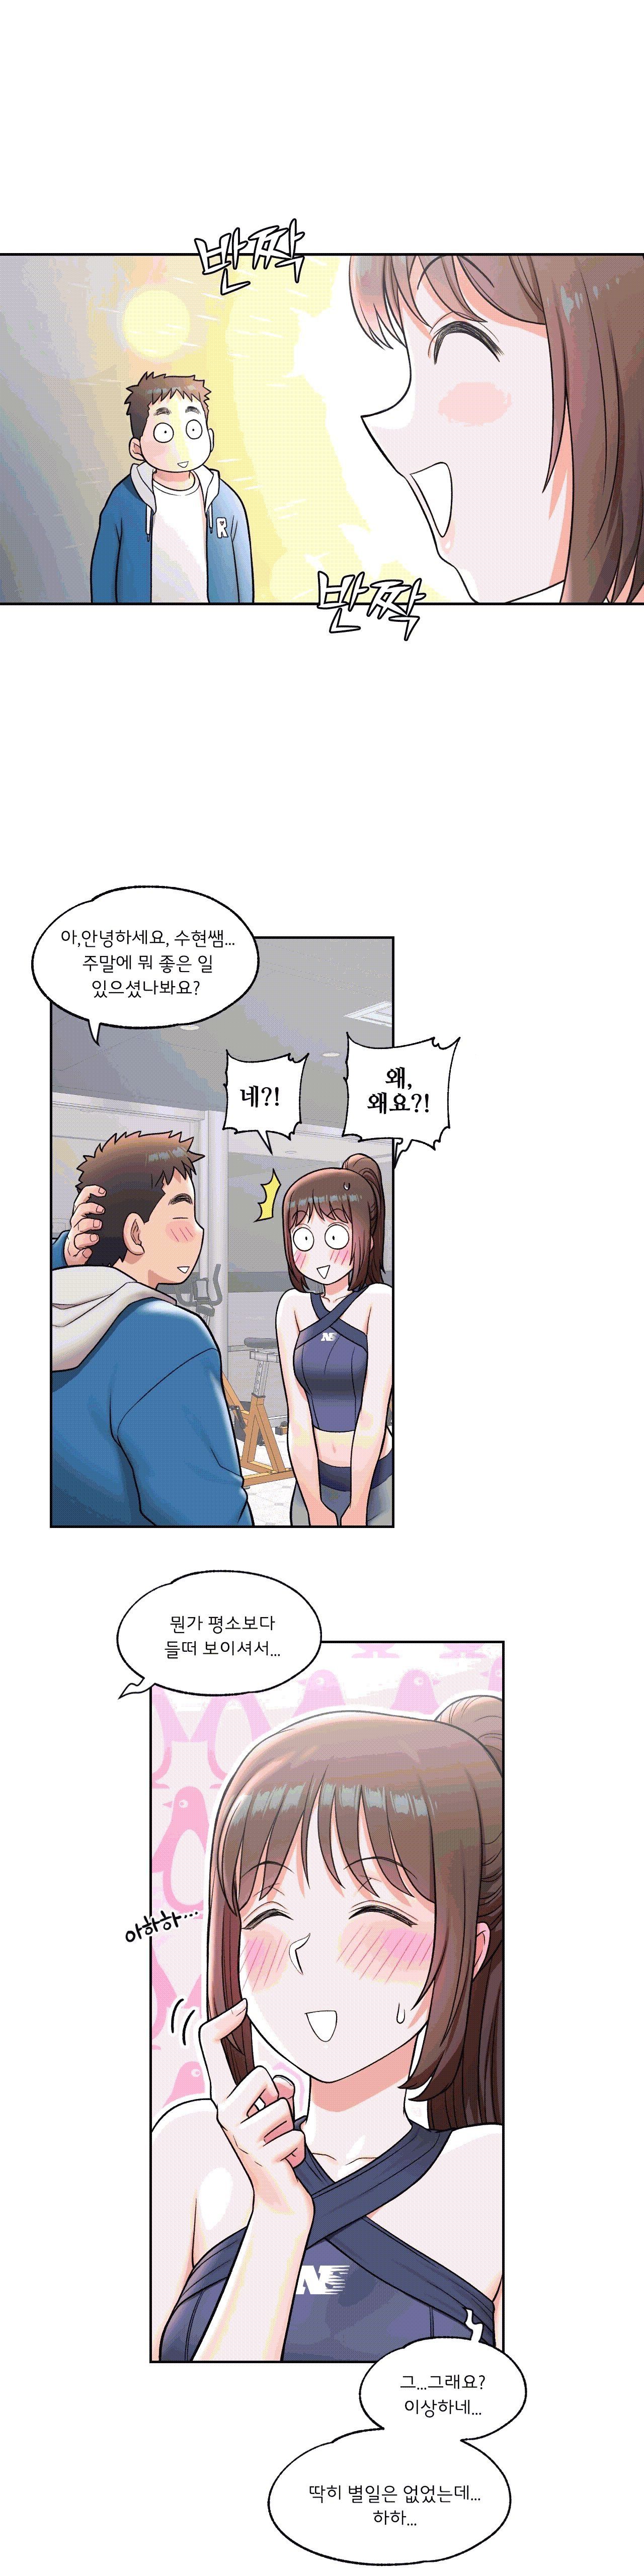 Sexercise Raw - Chapter 32 Page 4